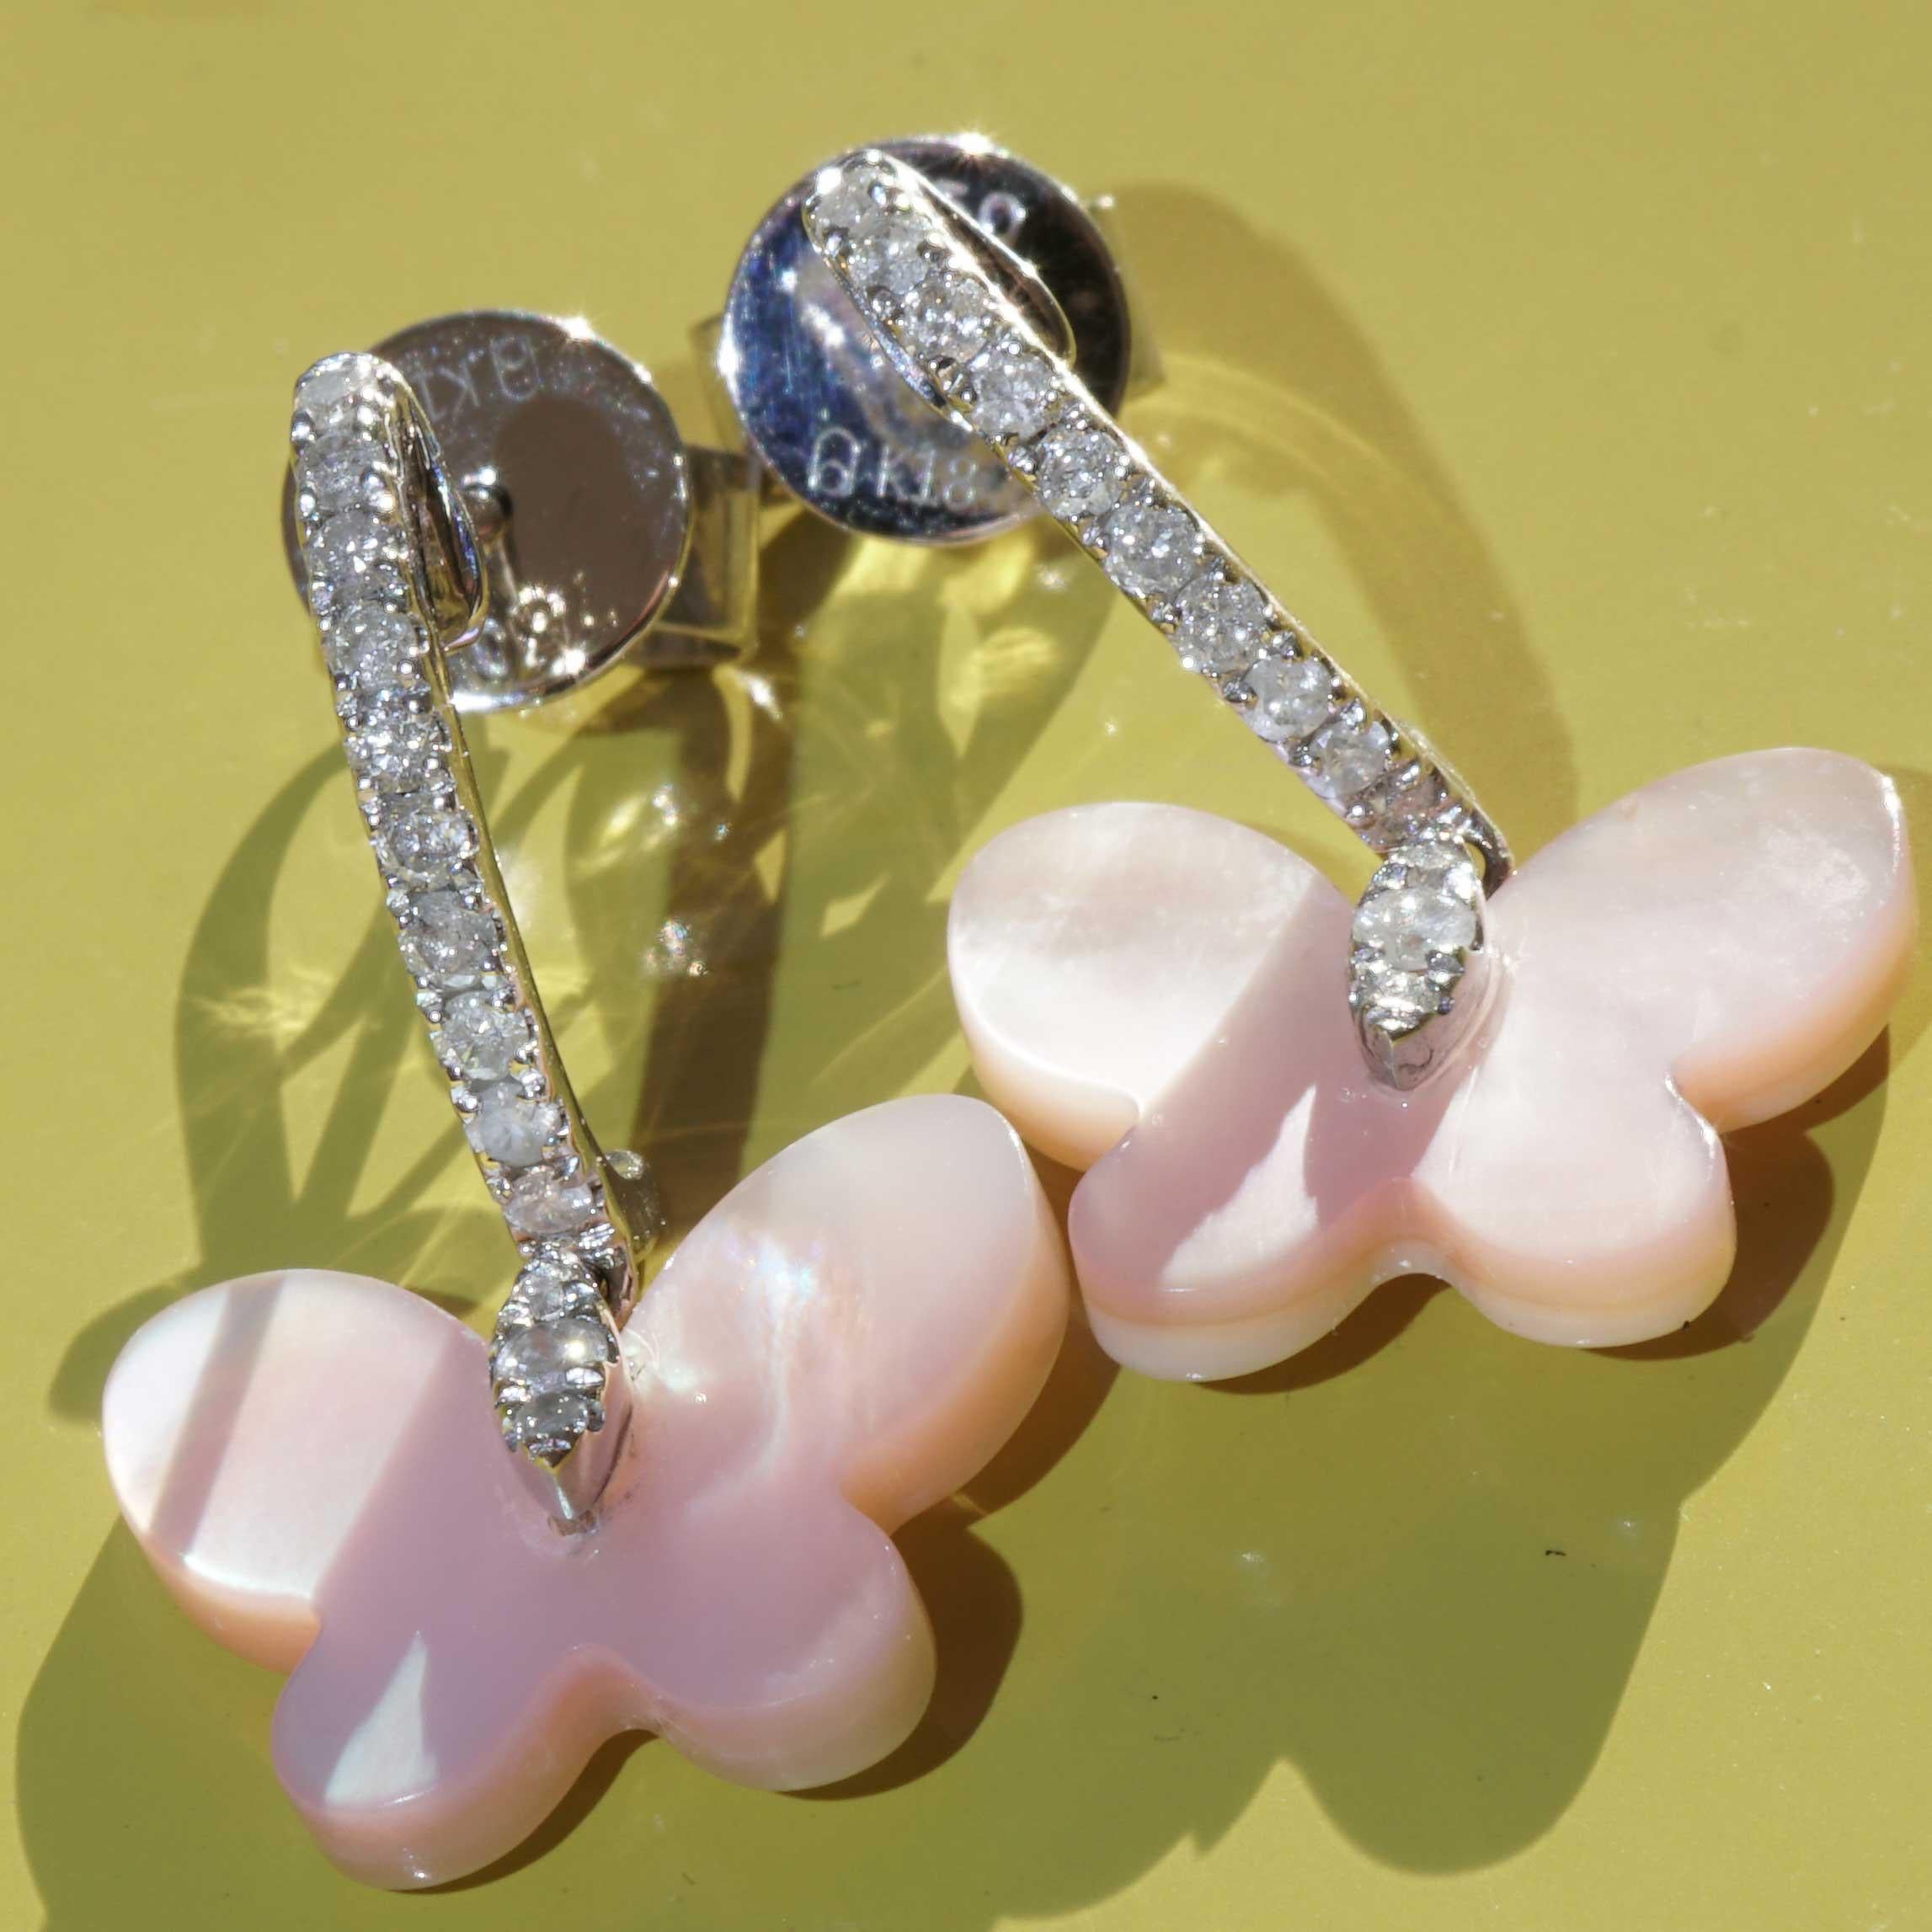 Butterfly fly totally pretty earrings with floating pink mother-of-pearl butterflies, half hoop earrings with 26 full-cut diamonds total approx. 0.24, W (white) / SI-P (small -clear inclusions), approx. 23 x 13.5 x 7 mm, weighing approx. 3.3 grams,